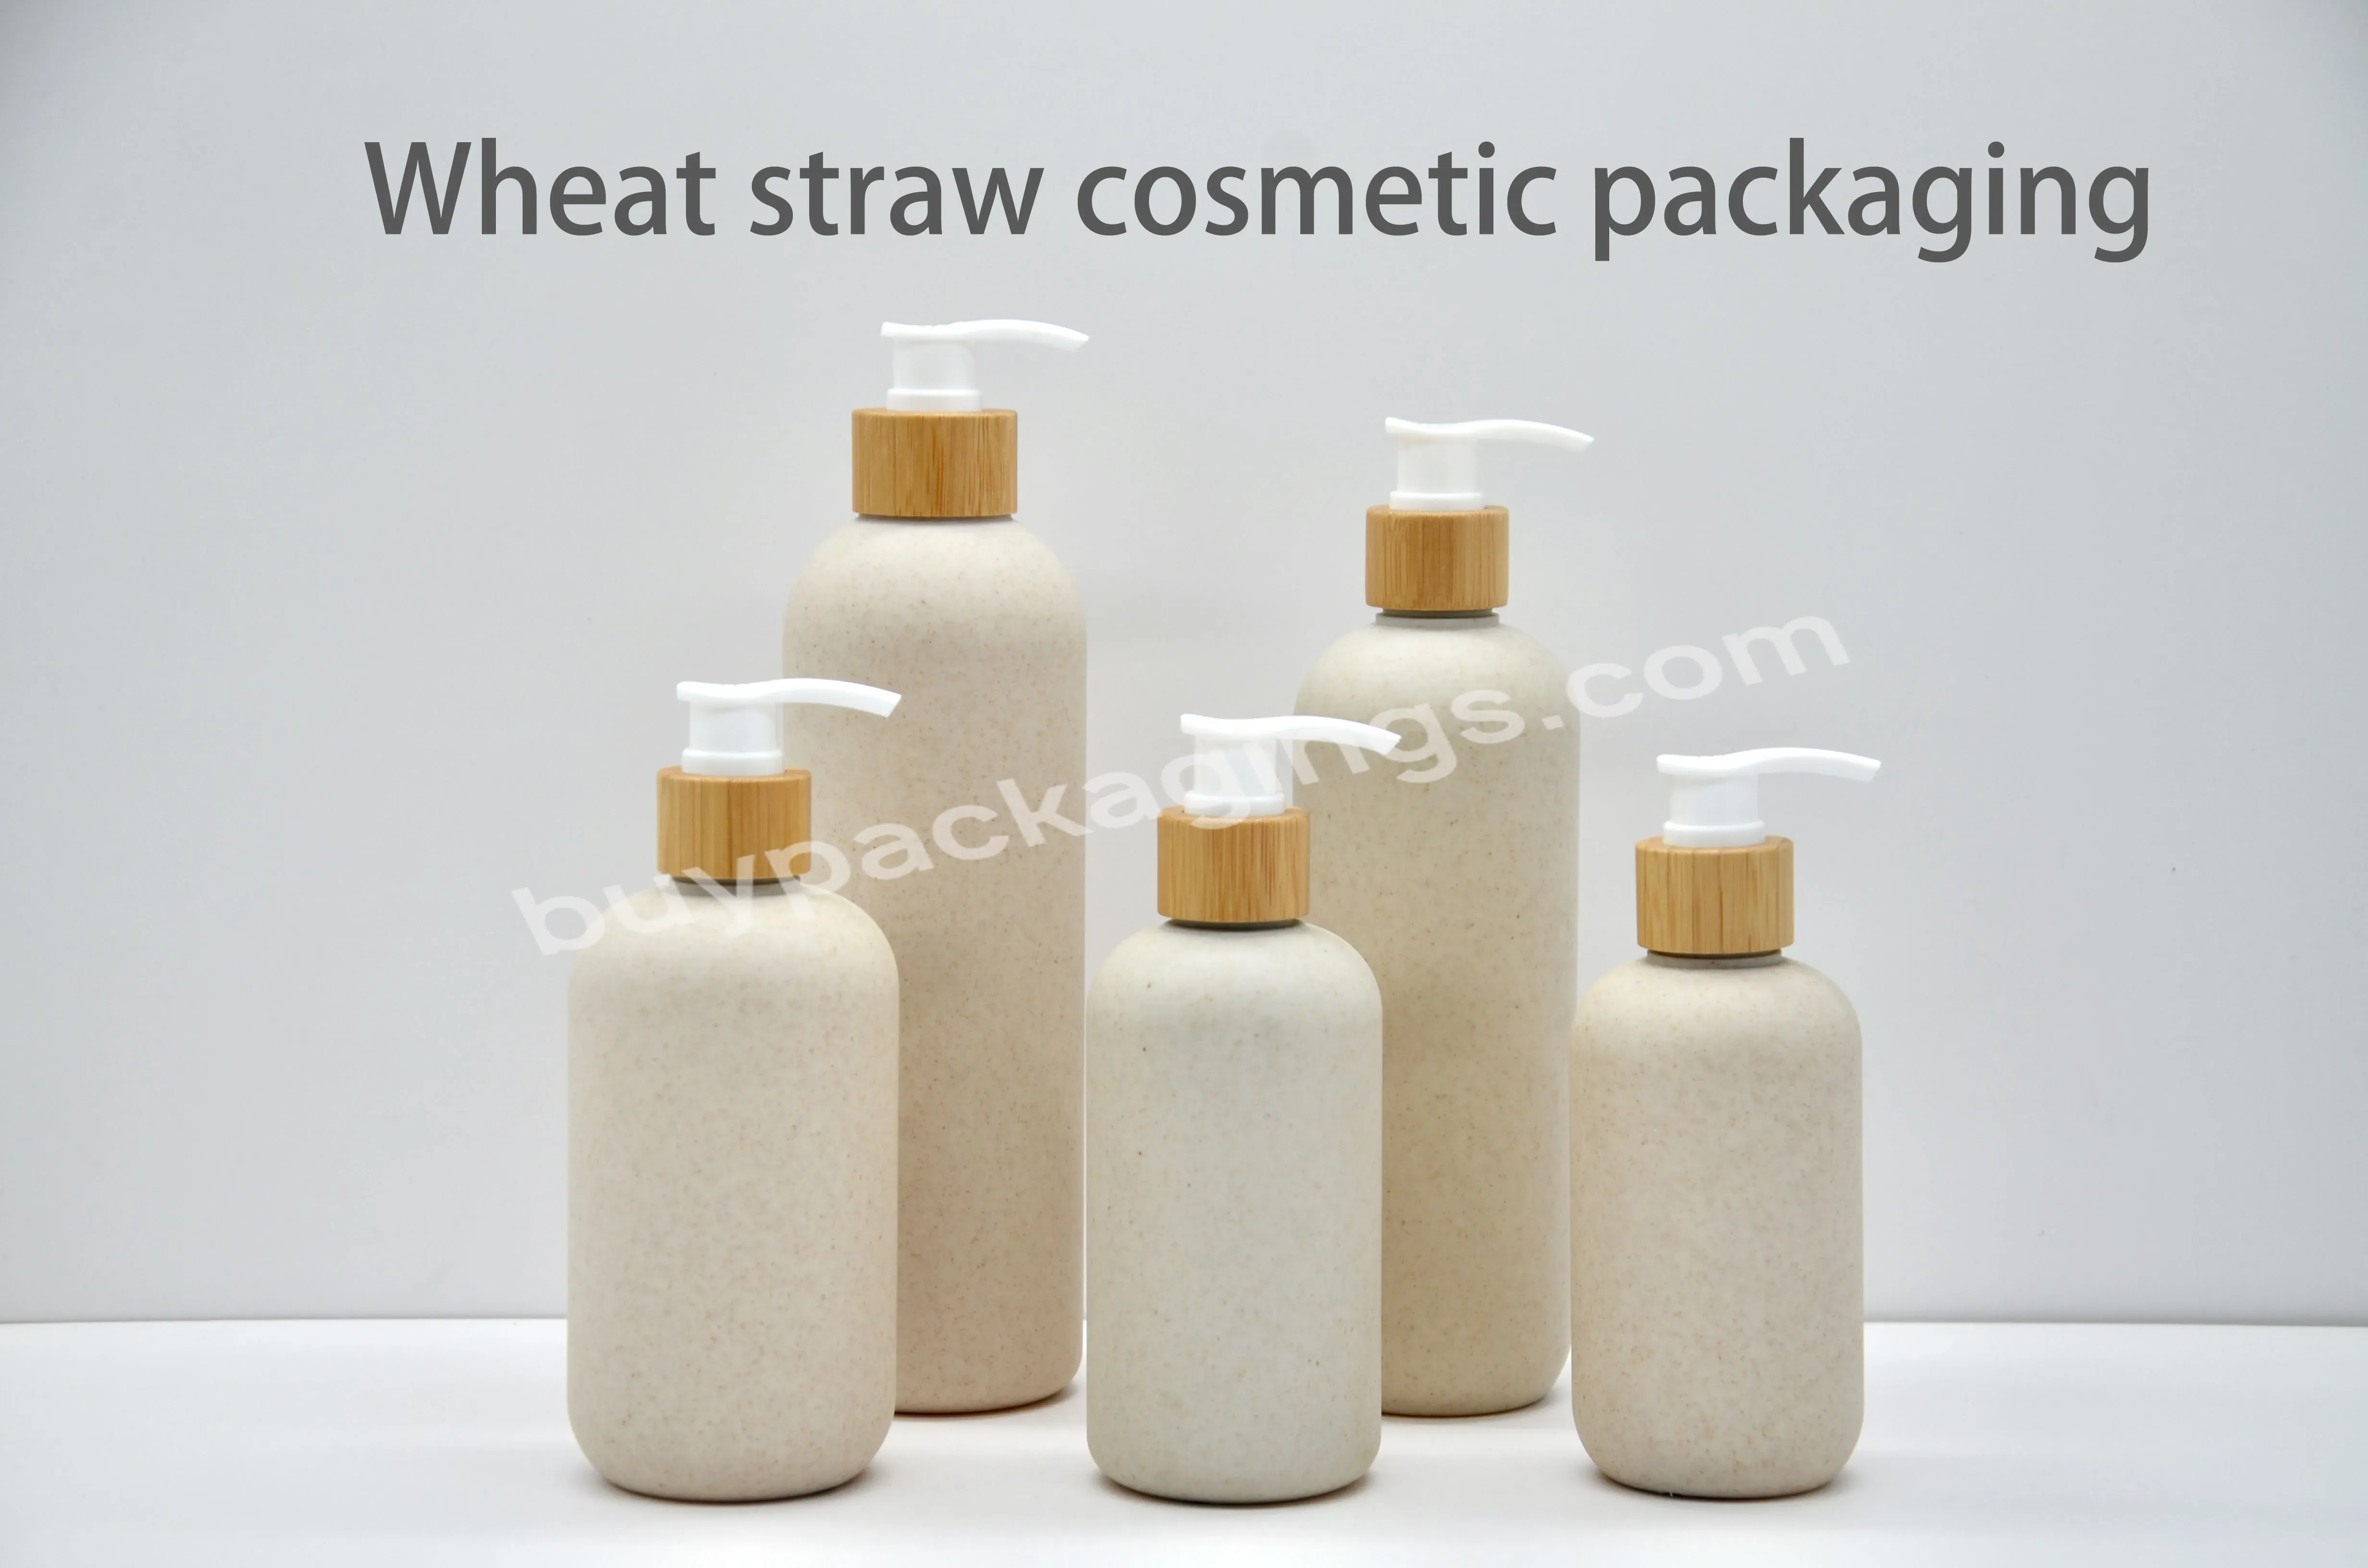 Custom Eco-friendly Wheat Straw Biodegradable Bottle Plastic Packaging - Buy Wheat Straw Bottles For Shampoo Lotion Liquid Cleaner Disinfectant,Biodegradable Shampoo Bottle Biodegradable 200ml To 500ml,Custom Eco-friendy Wheat Straw Bottles.